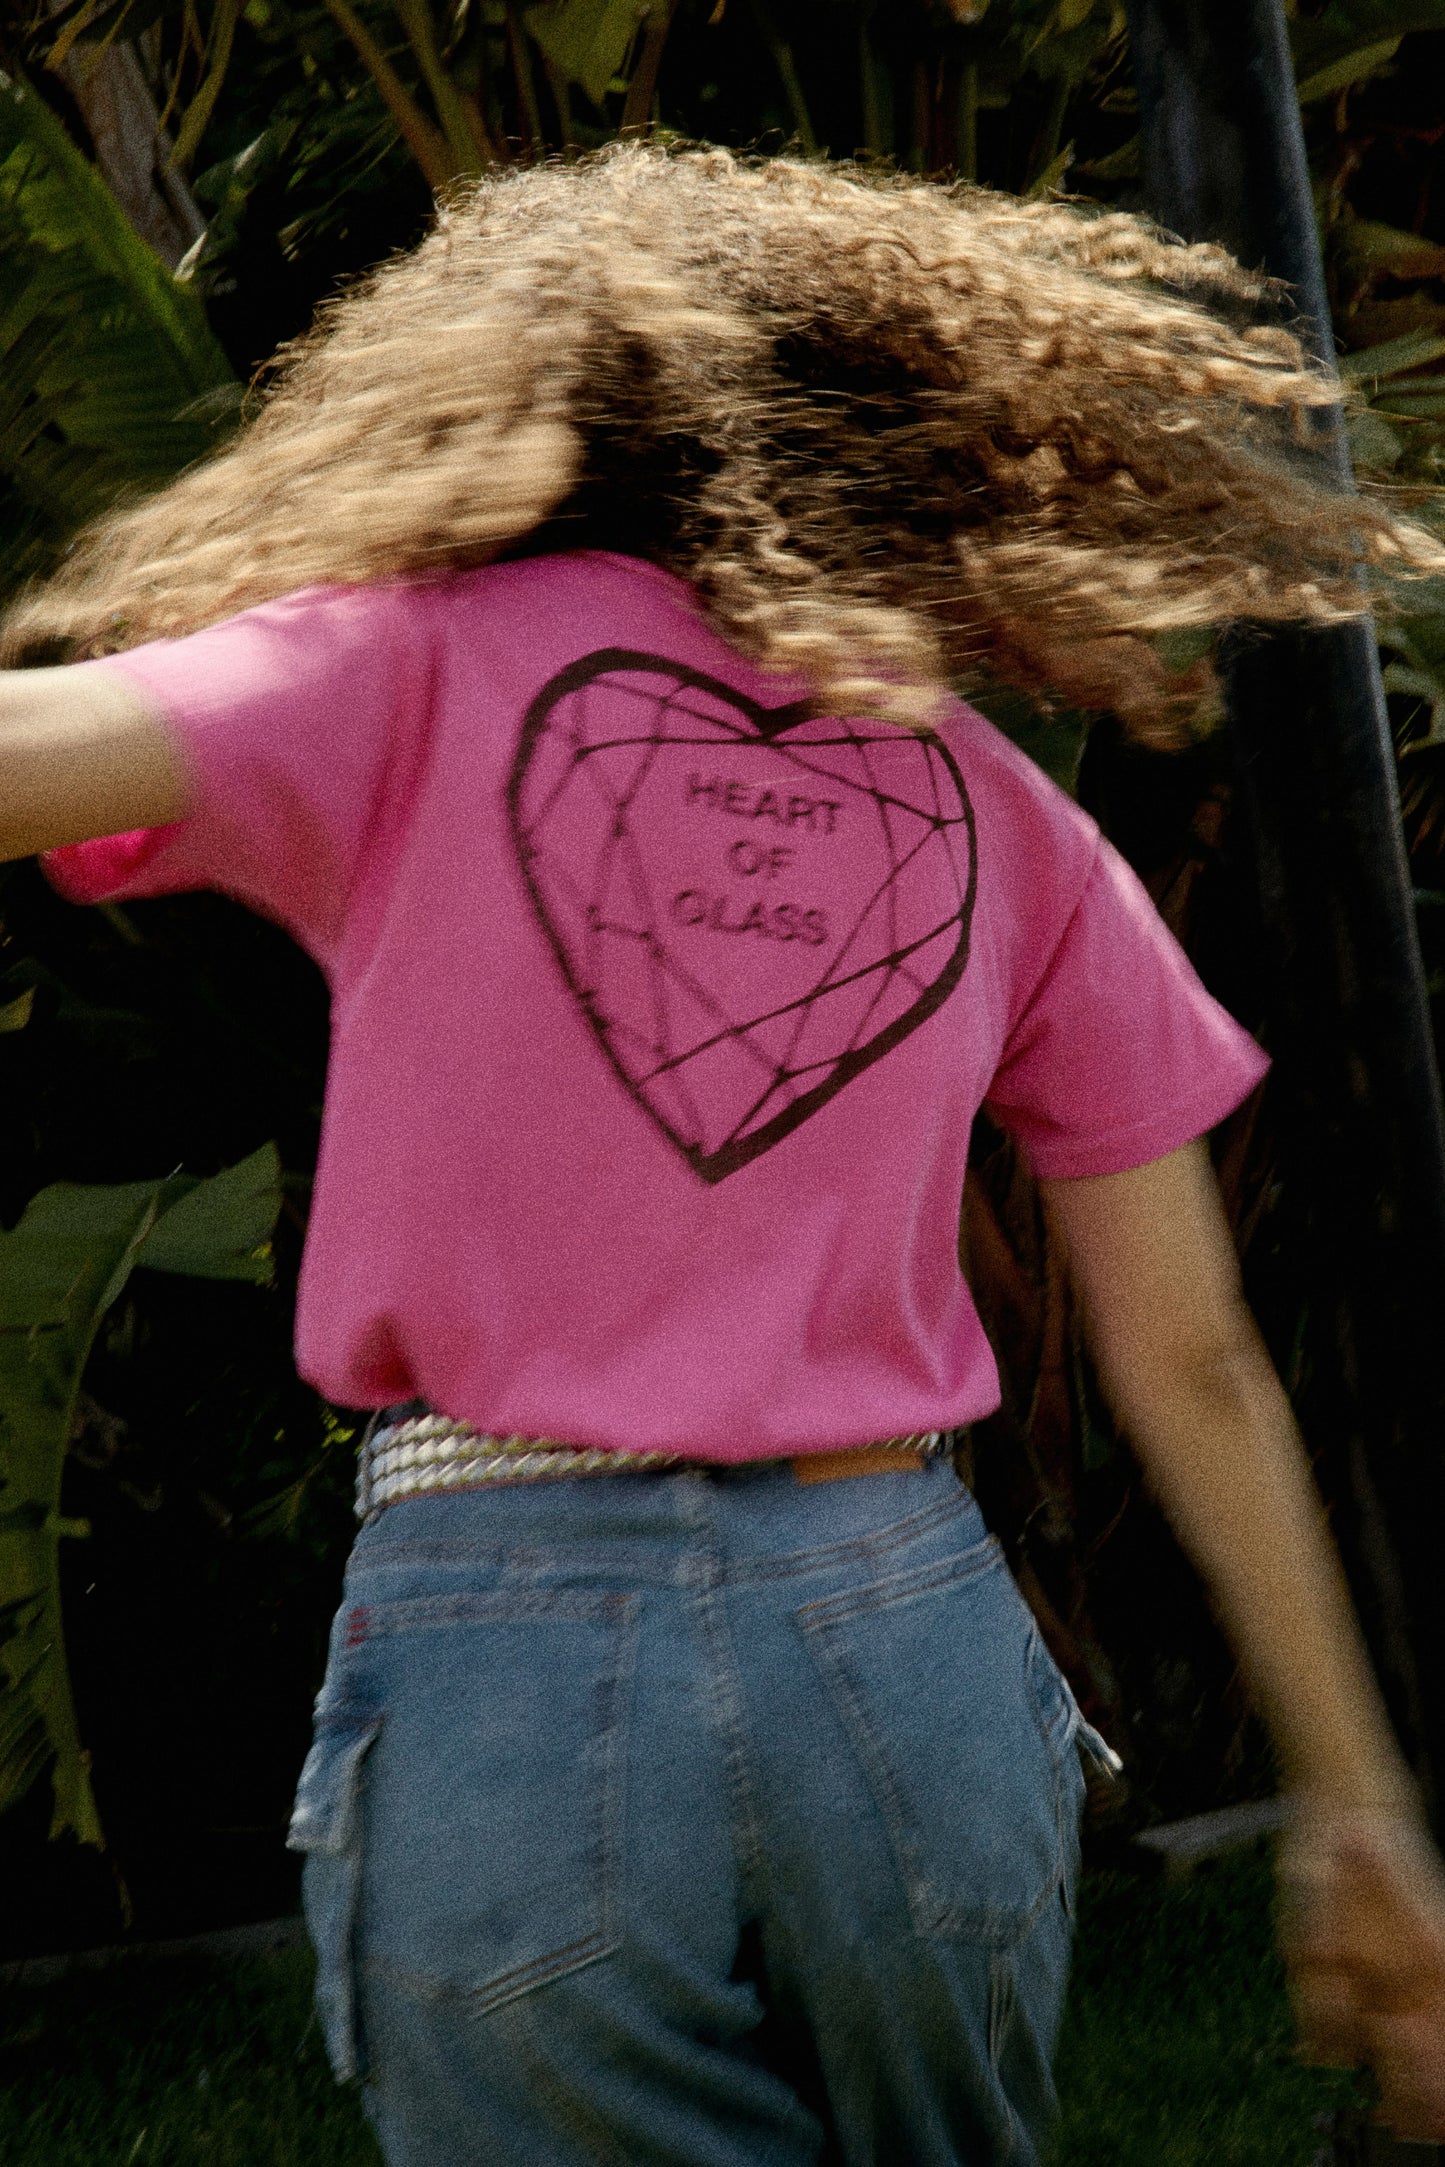 Model wearing Blondie graphic tee in pink with "Heart Of Glass" artwork on back.